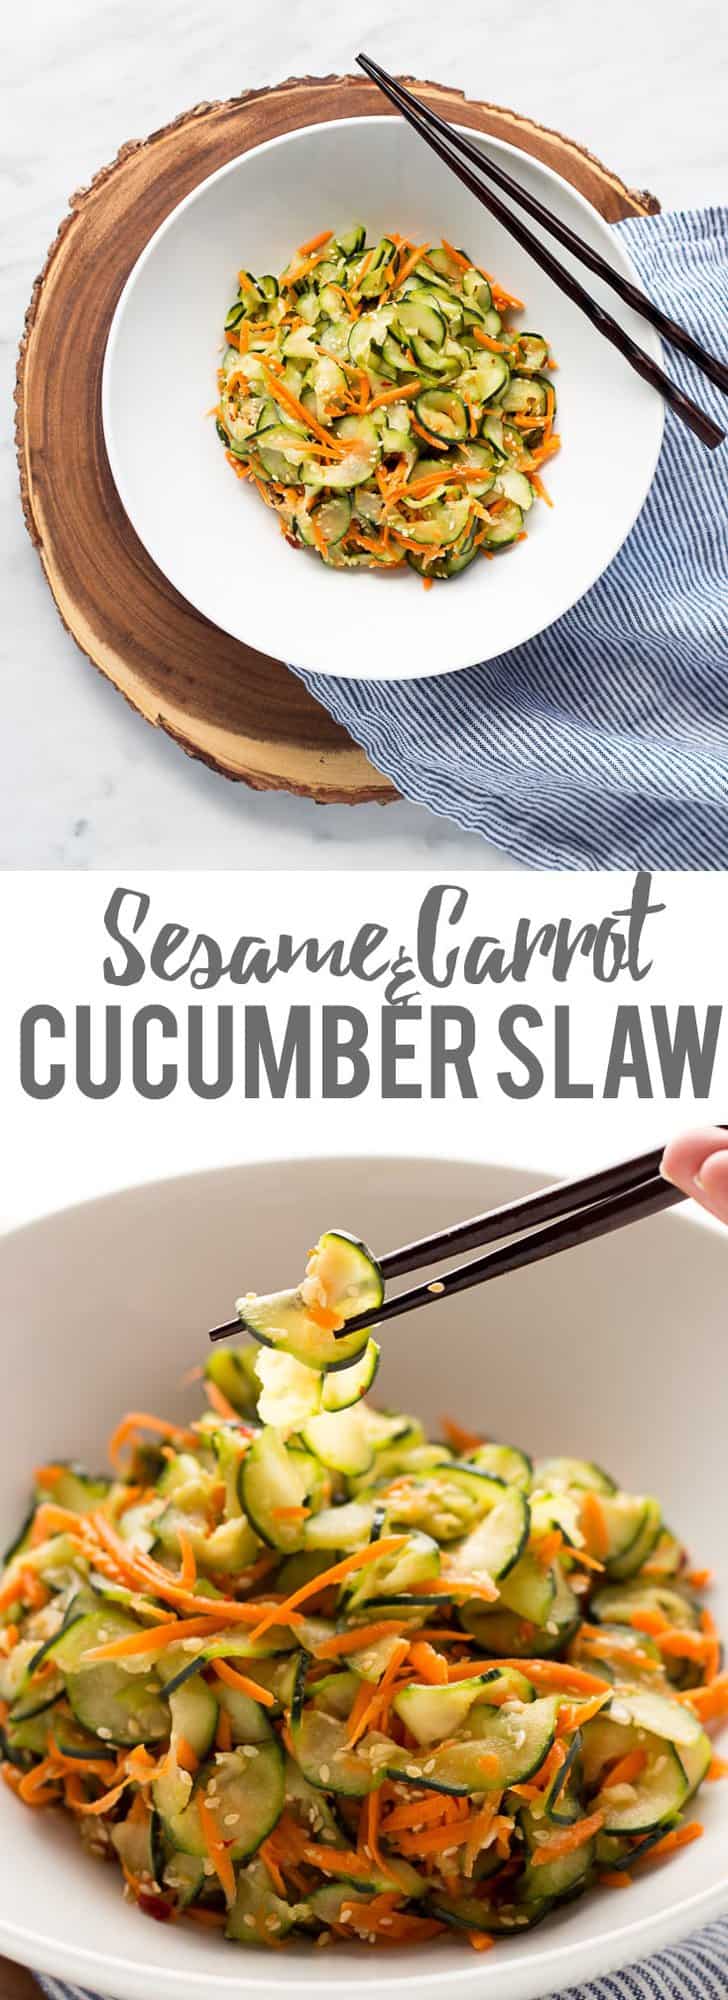 This Sesame Carrot and Cucumber Slaw is a cool and crisp side dish perfect for hot weather! It takes about 15 minutes to make, and is vegan and gluten free!